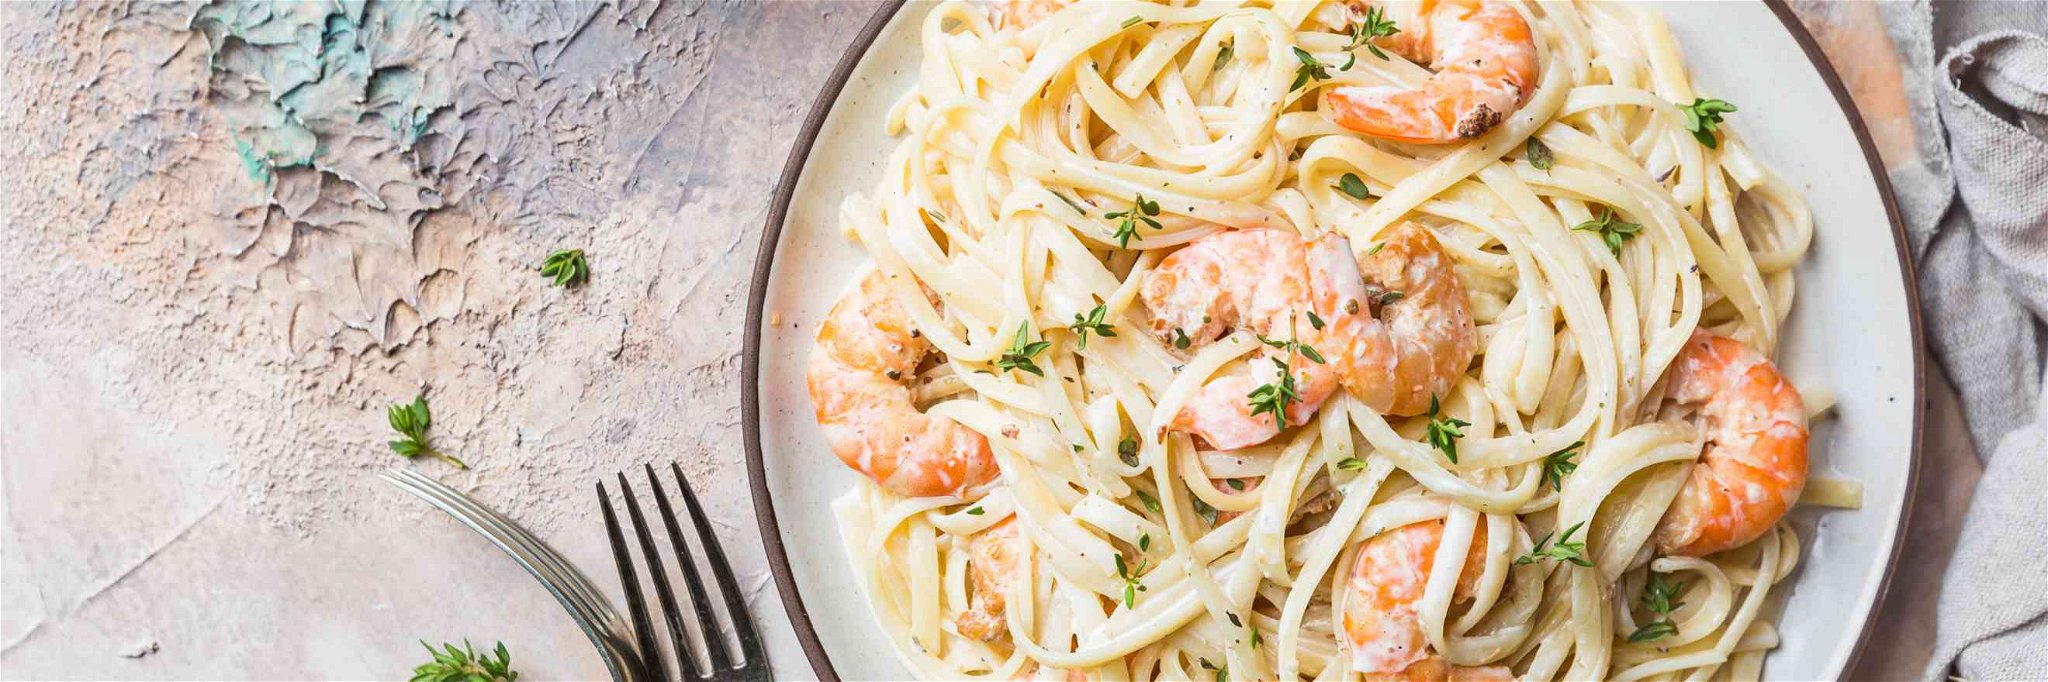 How to pair wine with pasta?&nbsp;